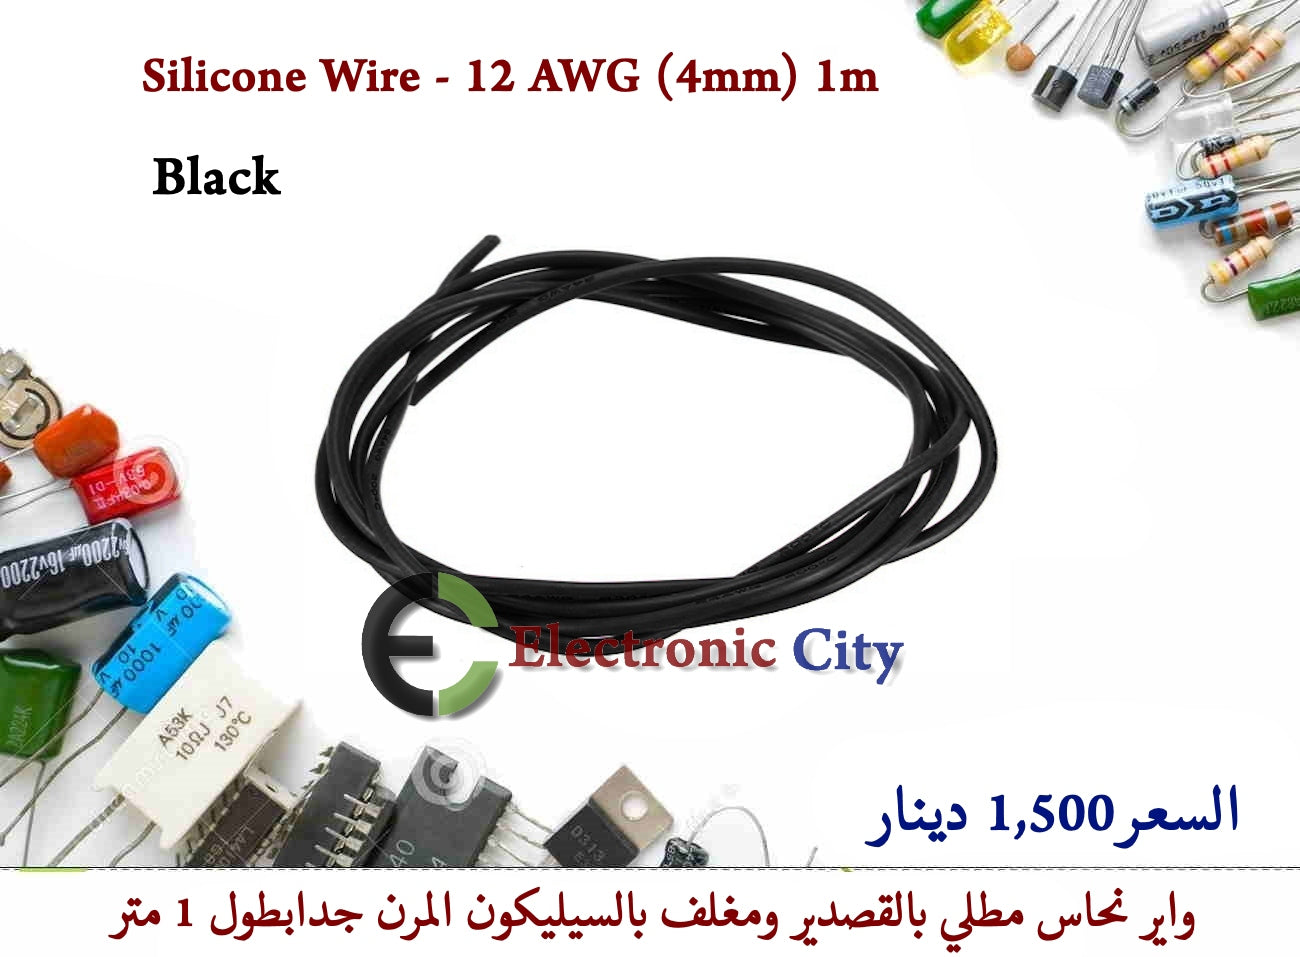 Silicone Wire - 12 AWG (4mm) 1m Black